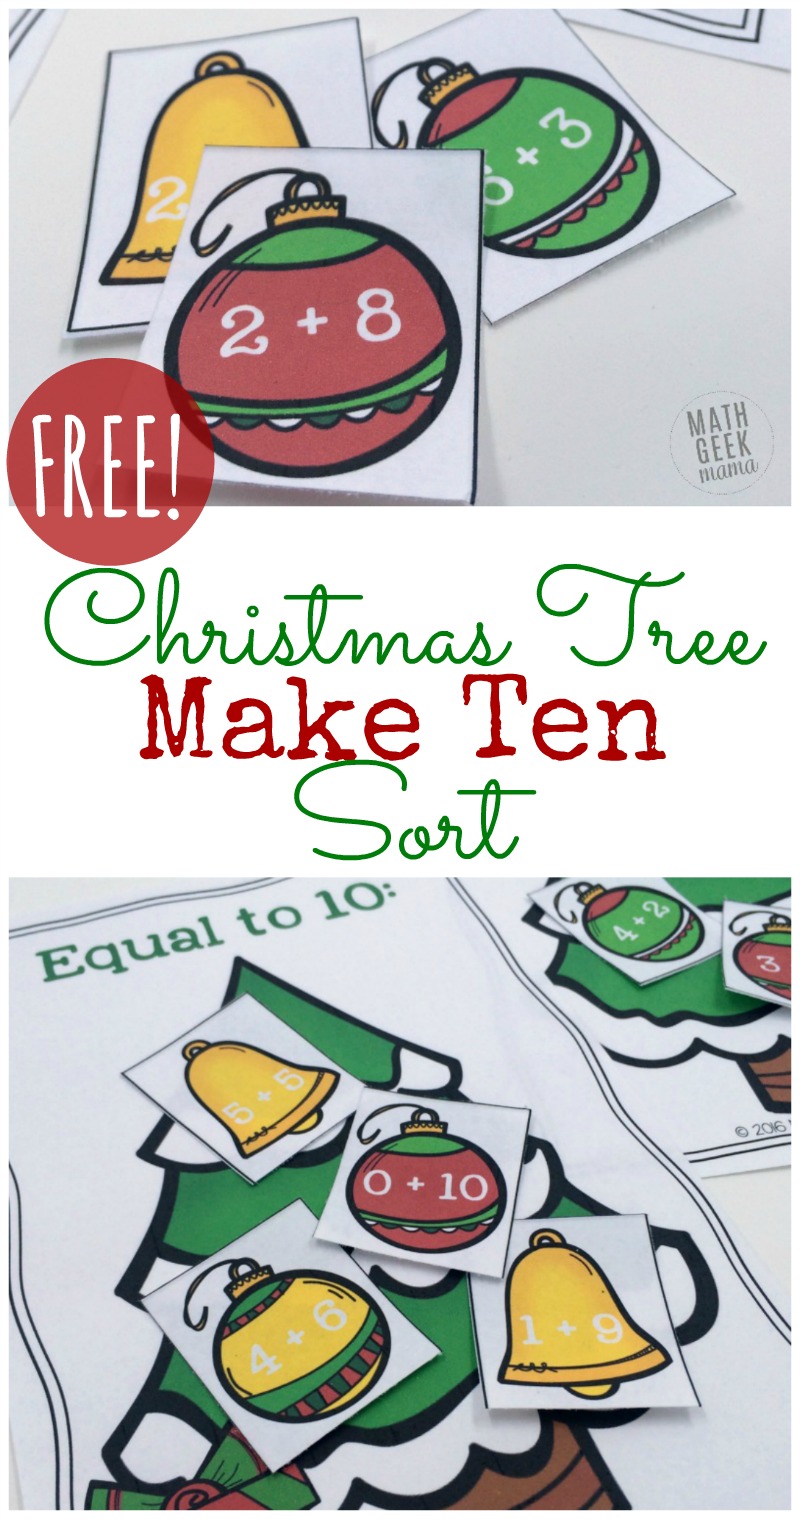 Help your kids work on addition facts, increase fluency and learn to make ten with this fun Christmas Tree Make Ten sort! Grab your free copy at MathGeekMama.com!